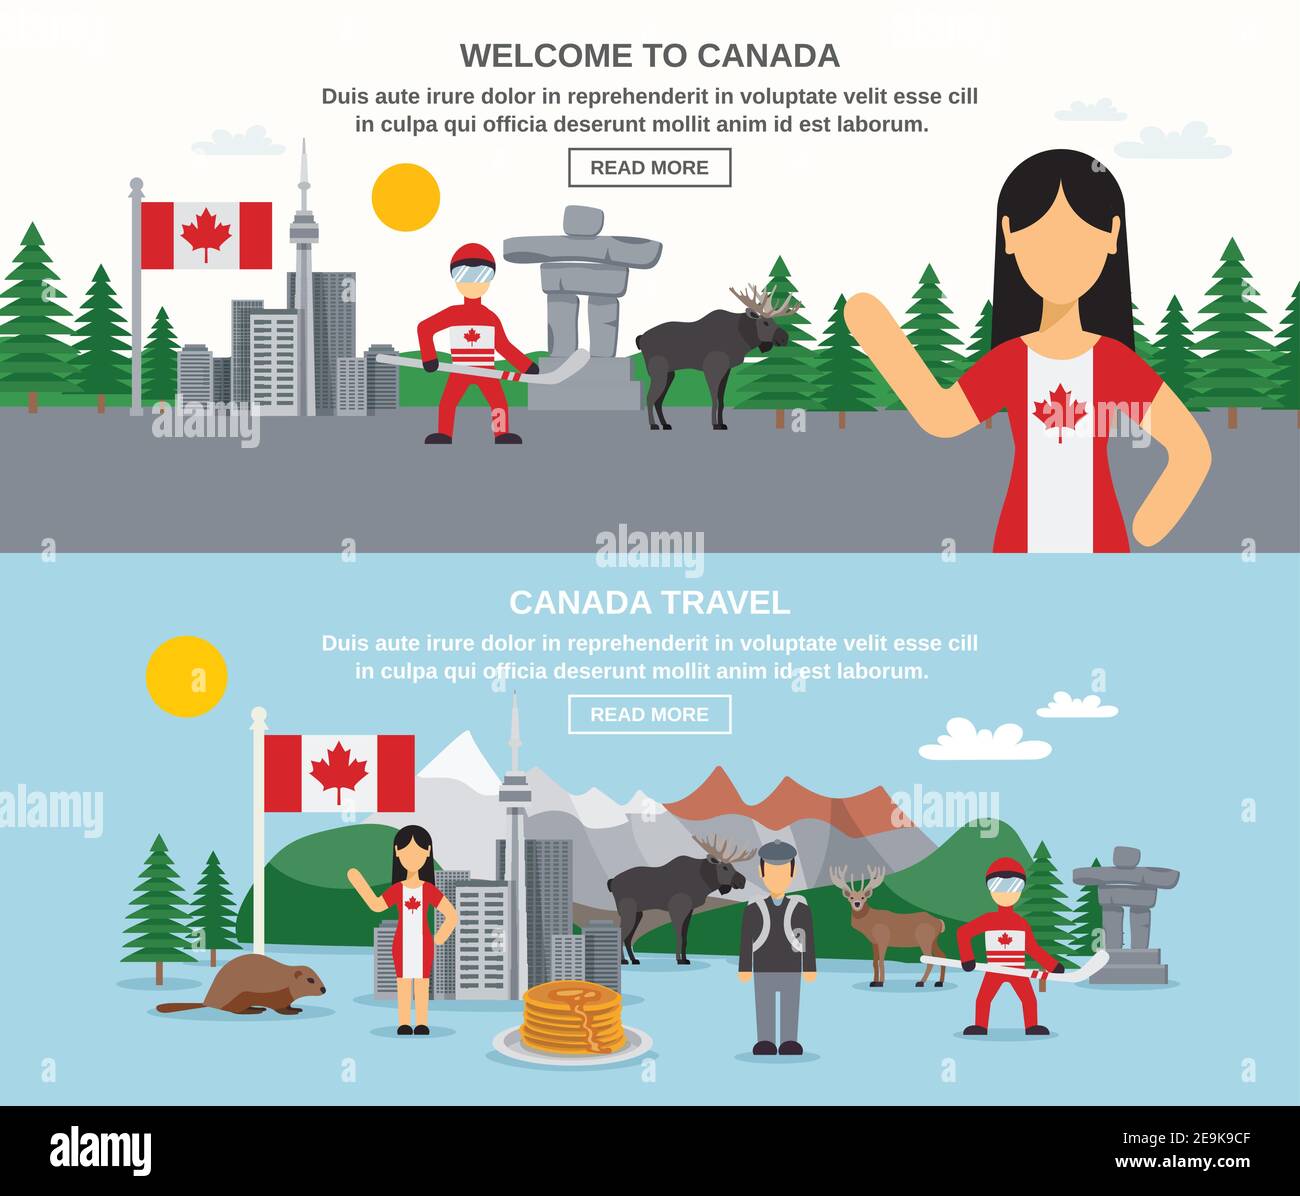 Welcome to canada banners with hockey animals food buildings and landscape isolated vector illustration Stock Vector